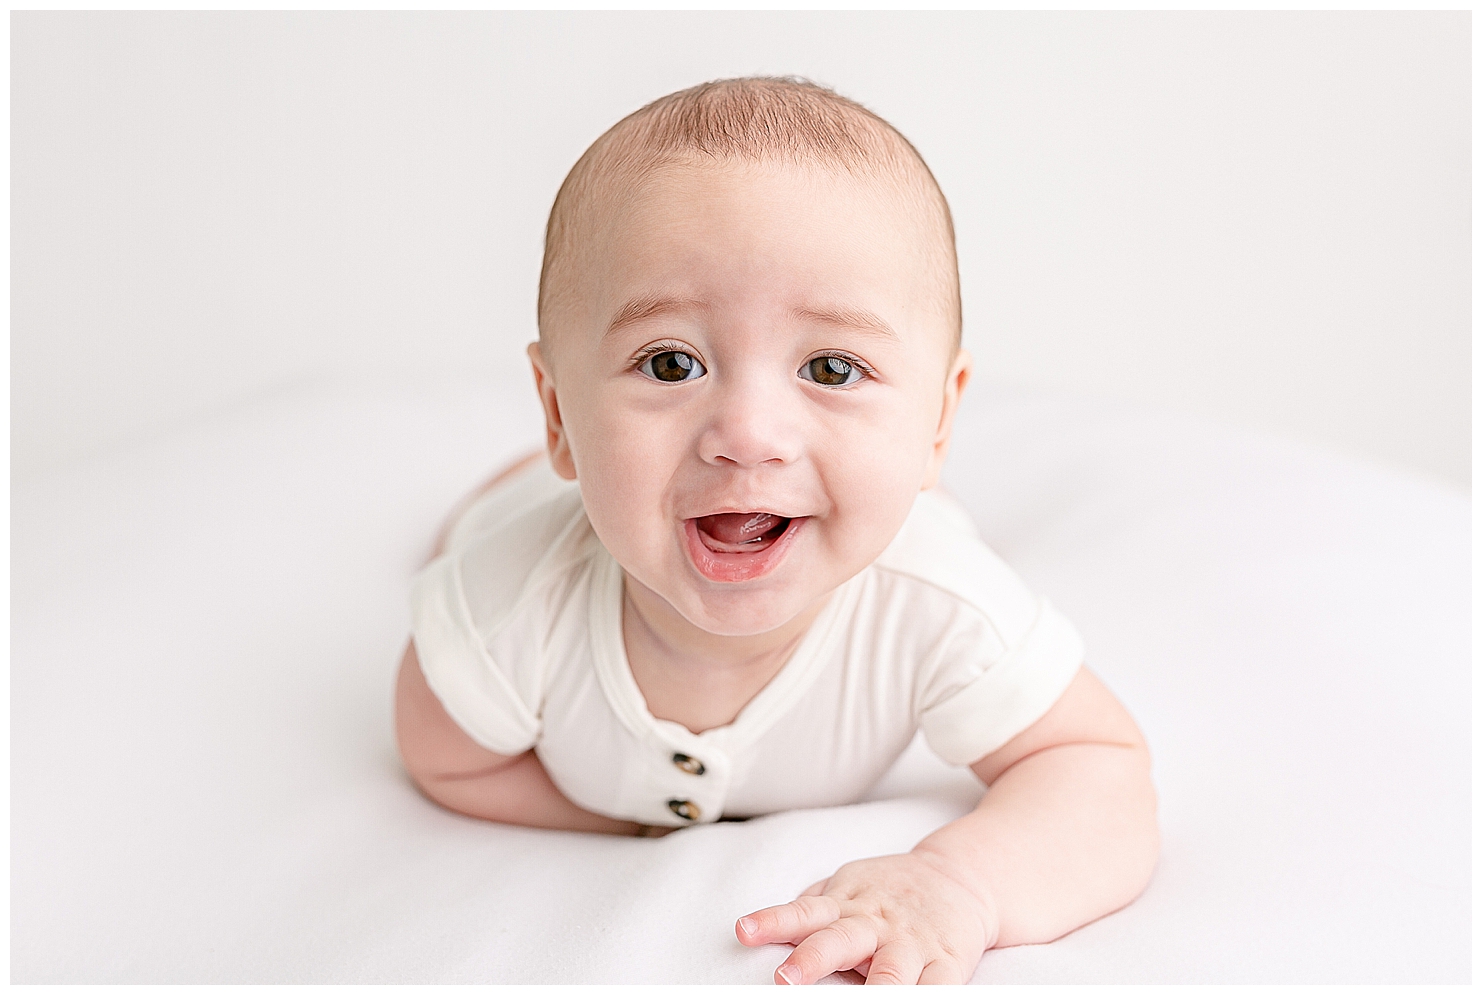 Baby with big brown eyes laying on belly holding up his head with a big gummy grin. Baby is about 6 months old and dressed in a white romper and laying on a white blanket.